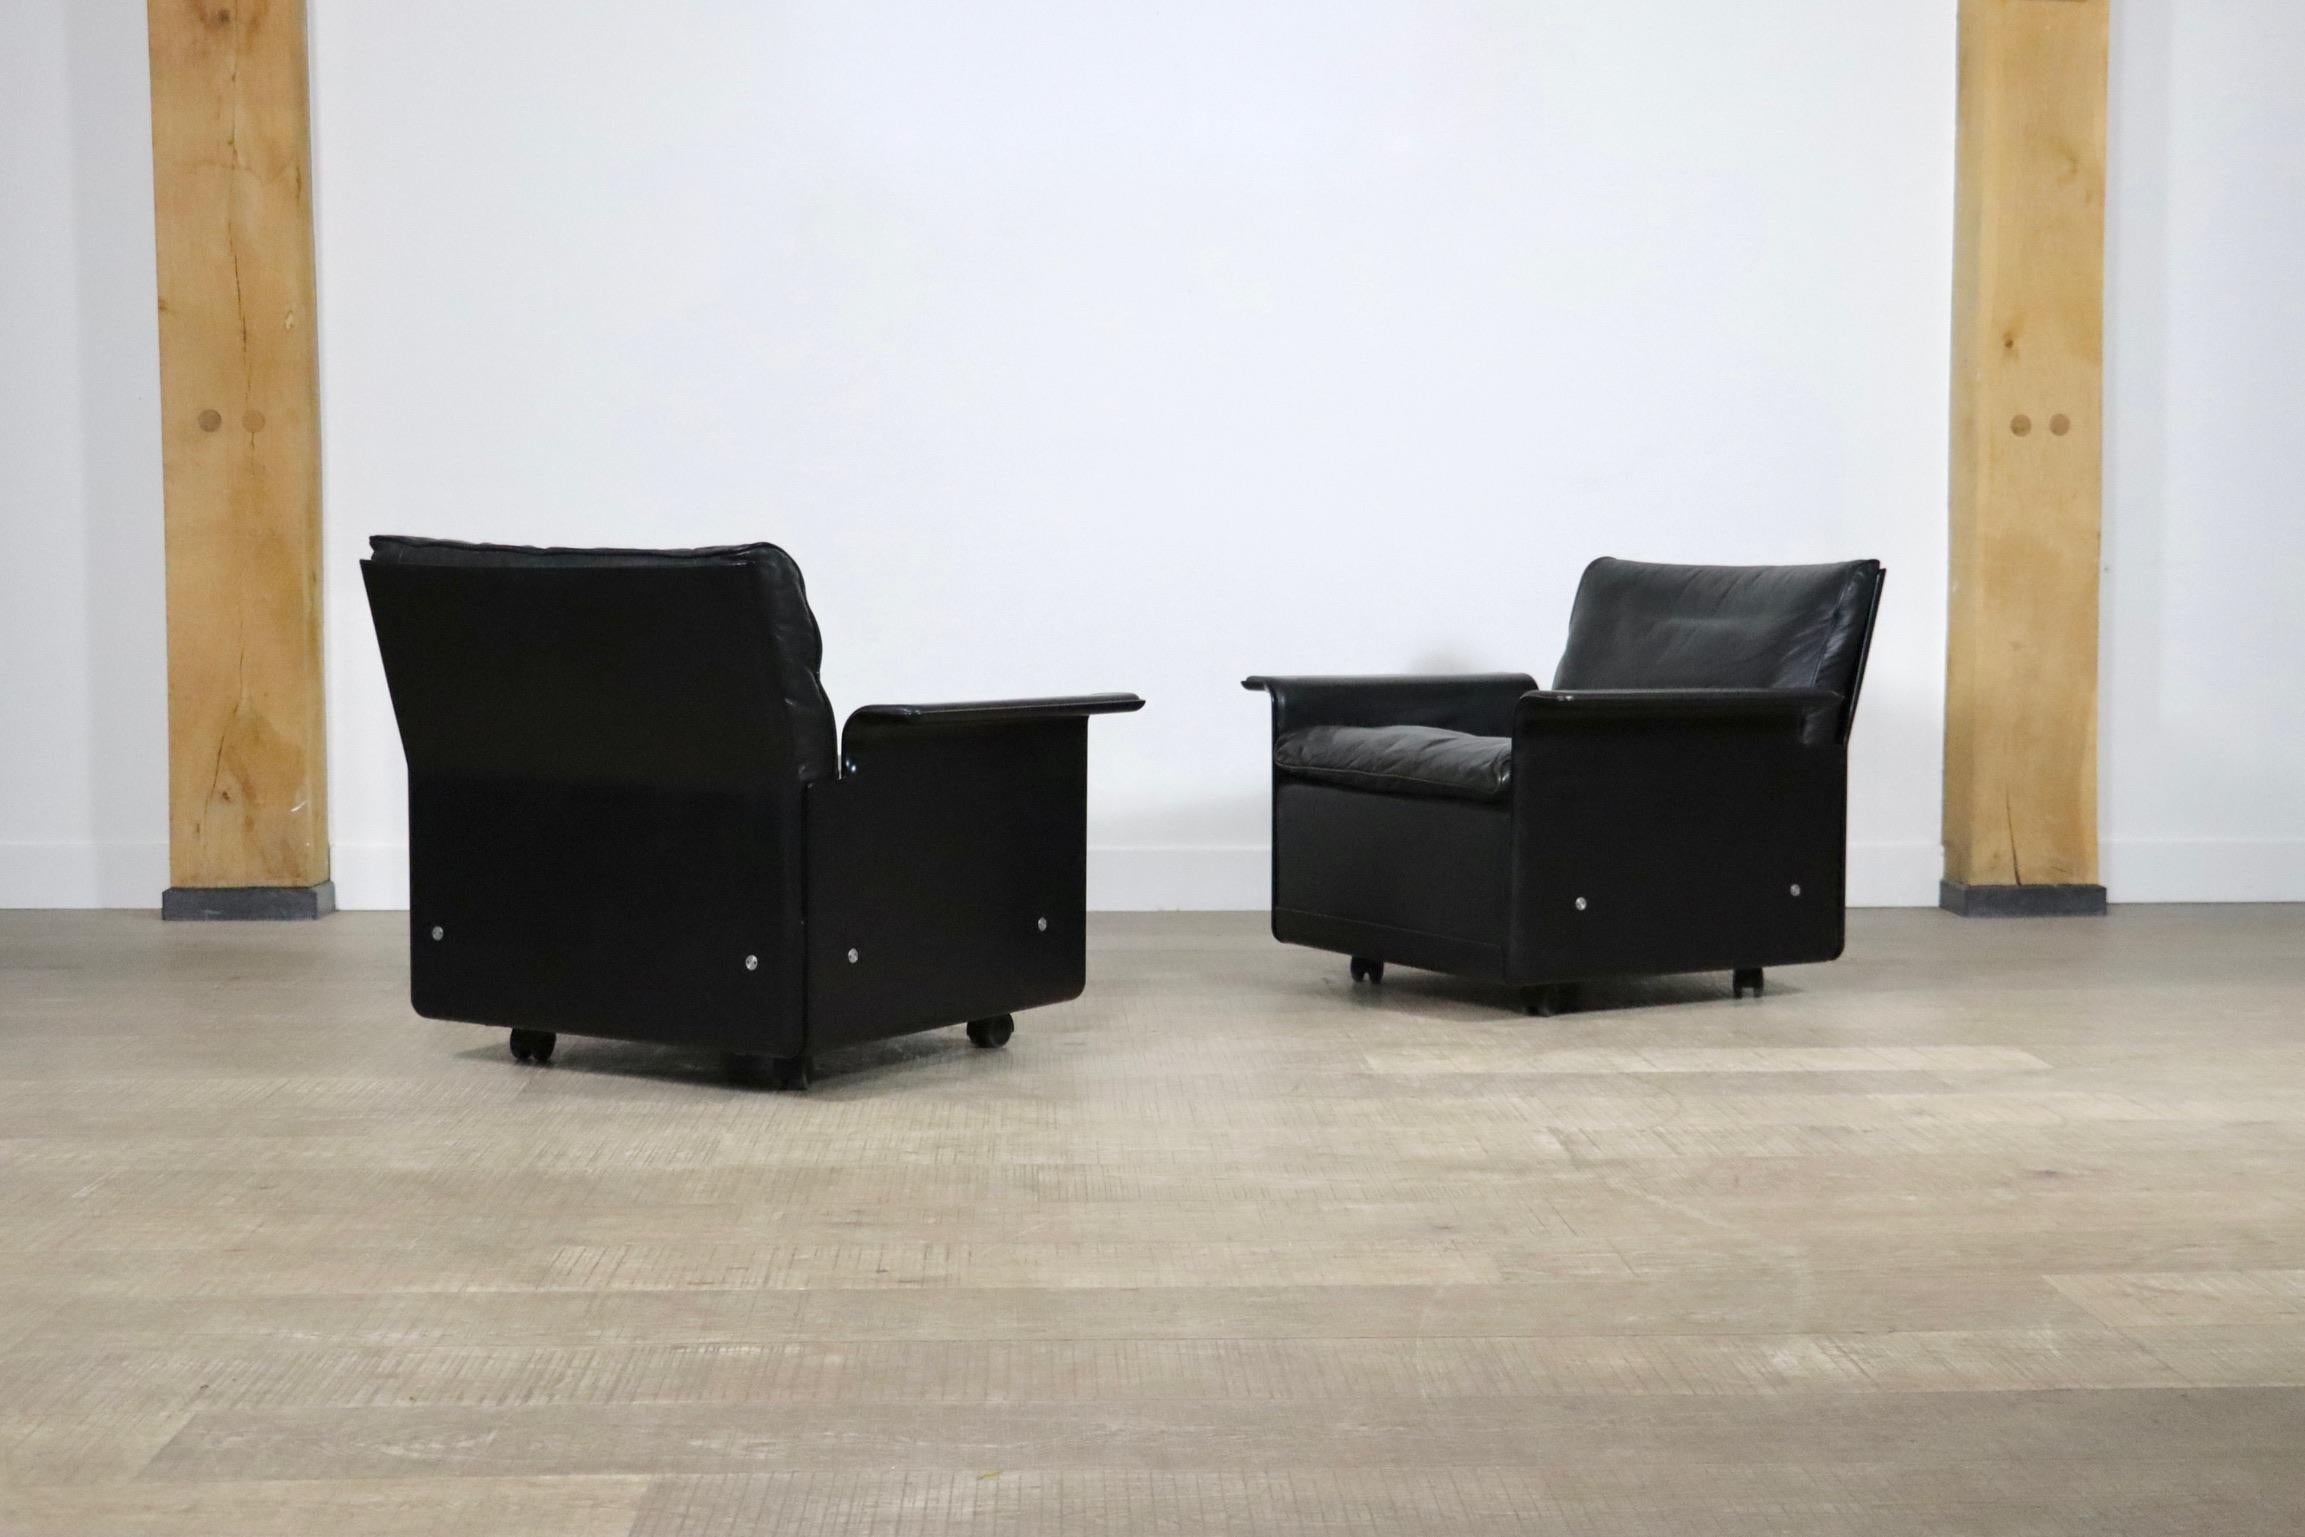 Late 20th Century Pair Of Dieter Rams Model 620 Lounge Chairs In Black Leather For Vitsoe, 1980s